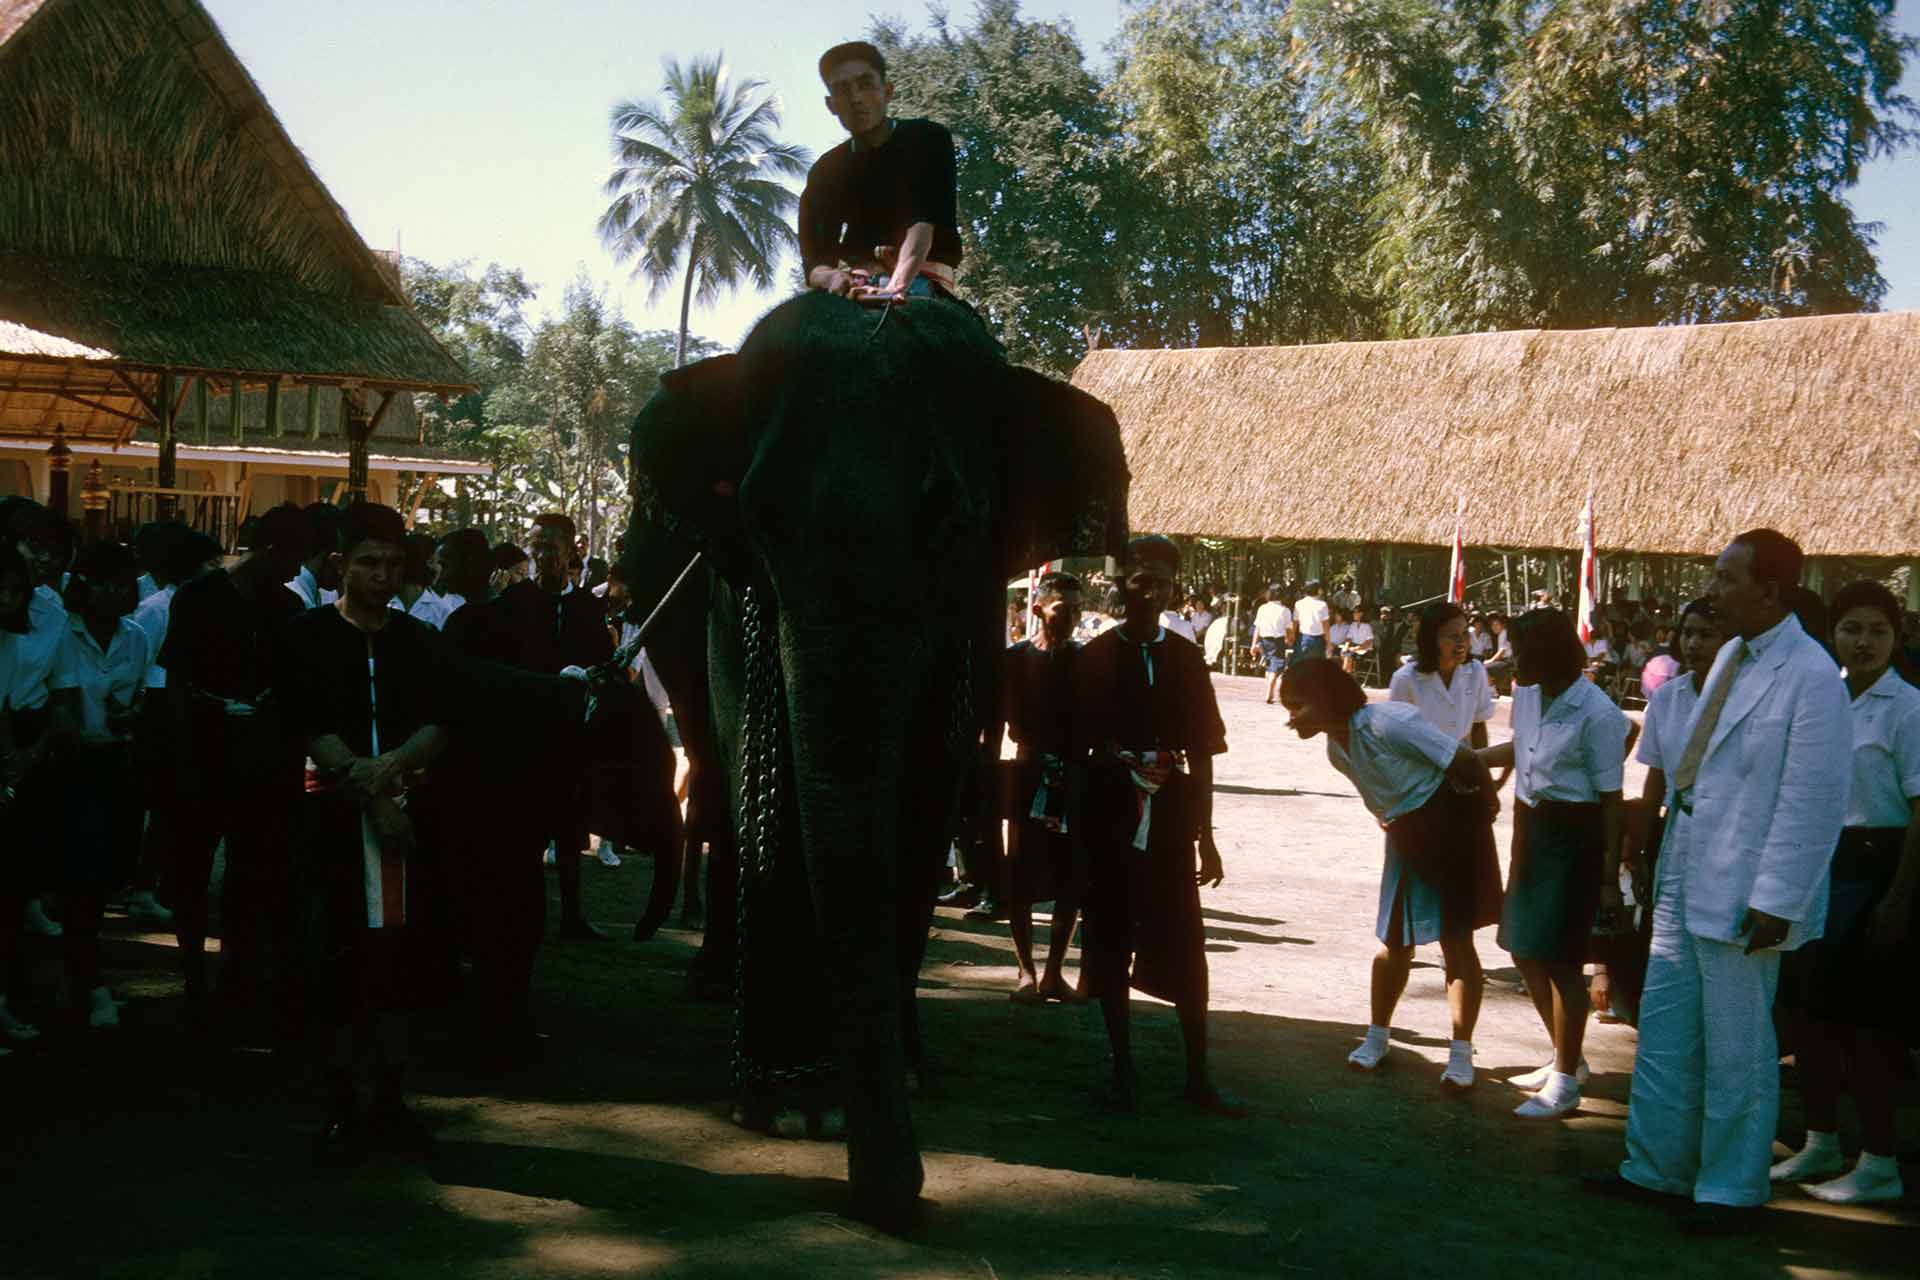 A man rides atop the mother elephant as it proceeds through a crowd of people